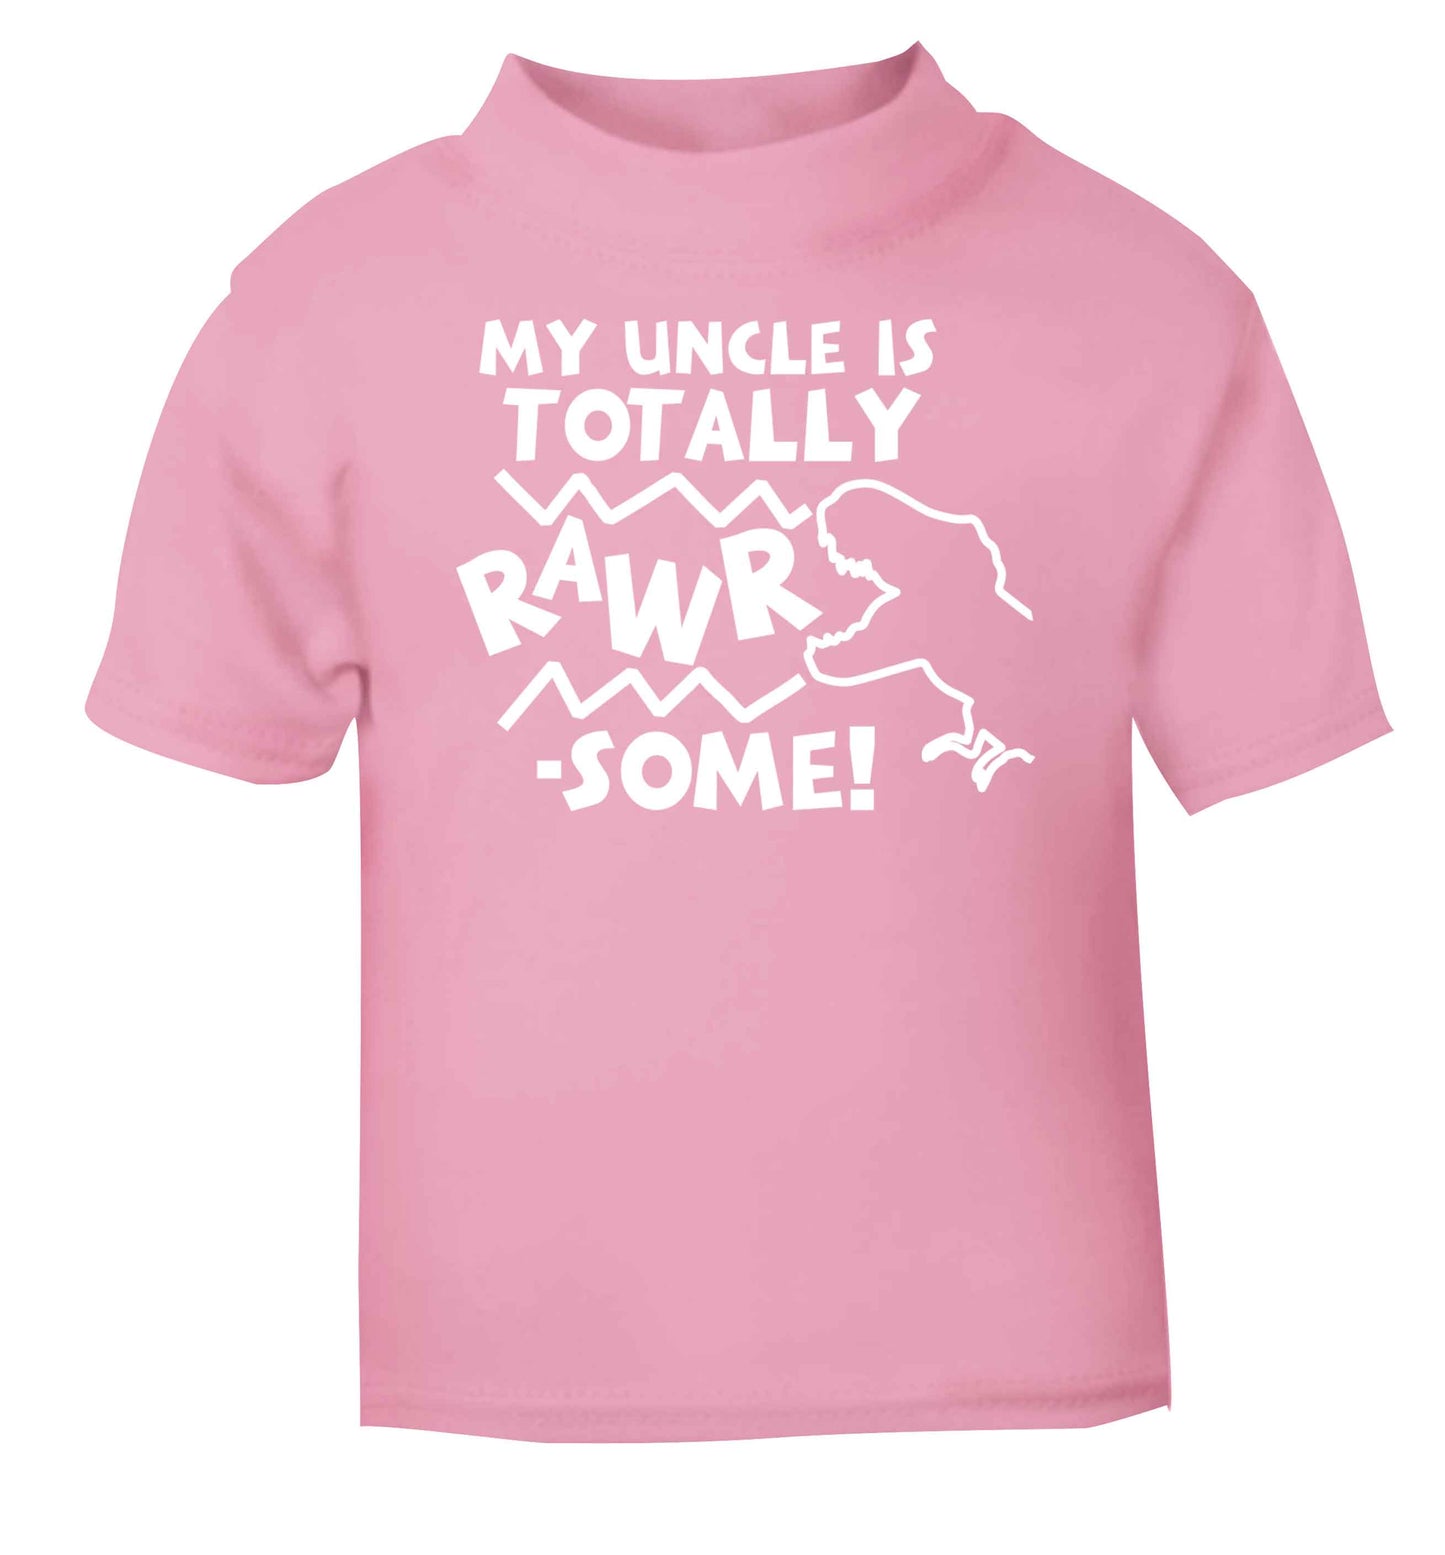 My uncle is totally rawrsome light pink baby toddler Tshirt 2 Years